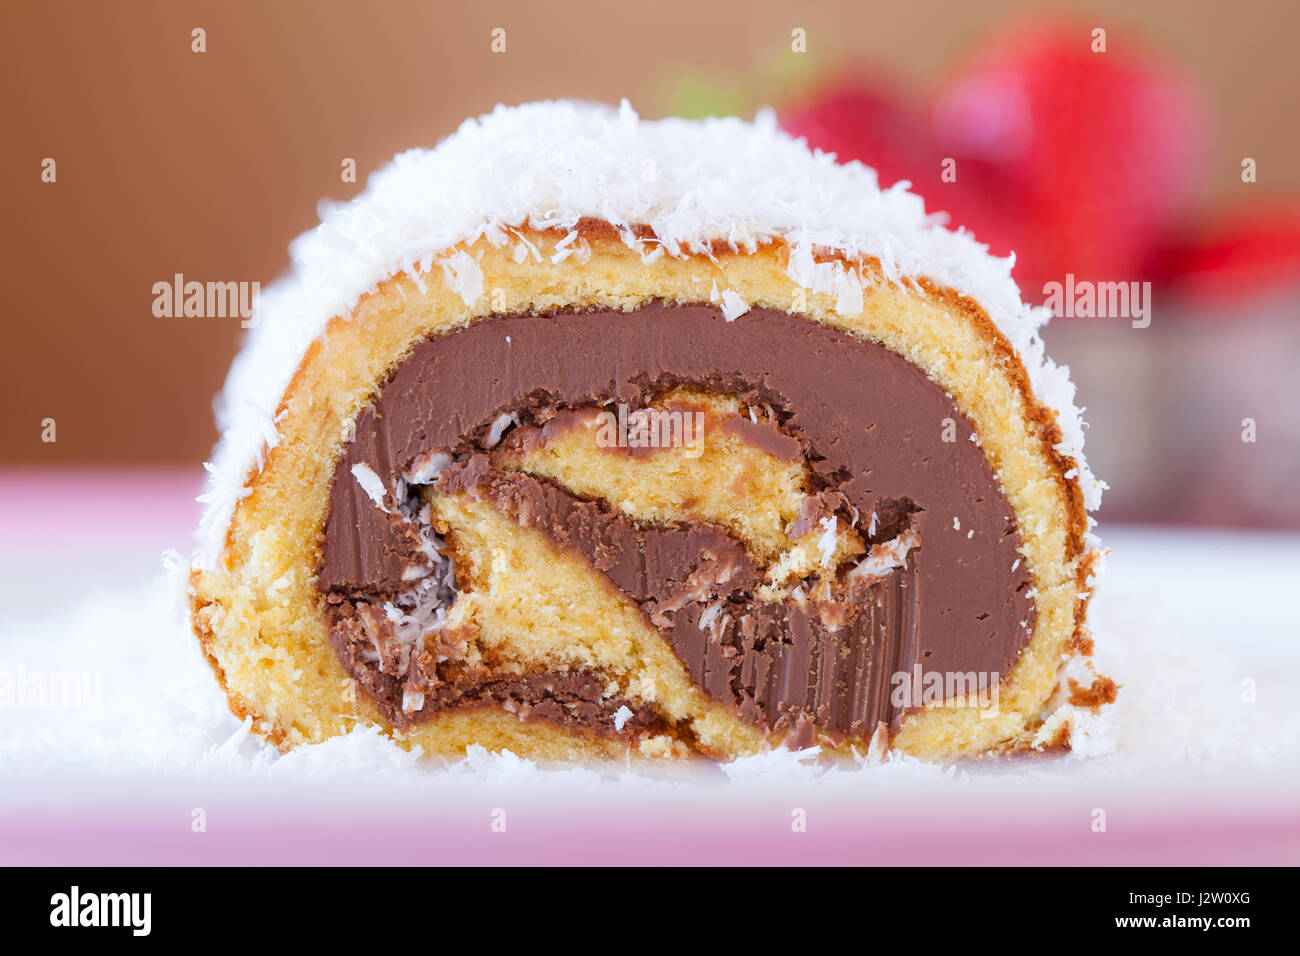 Piece of chocolate coconut cake roll, closeup view. Stock Photo